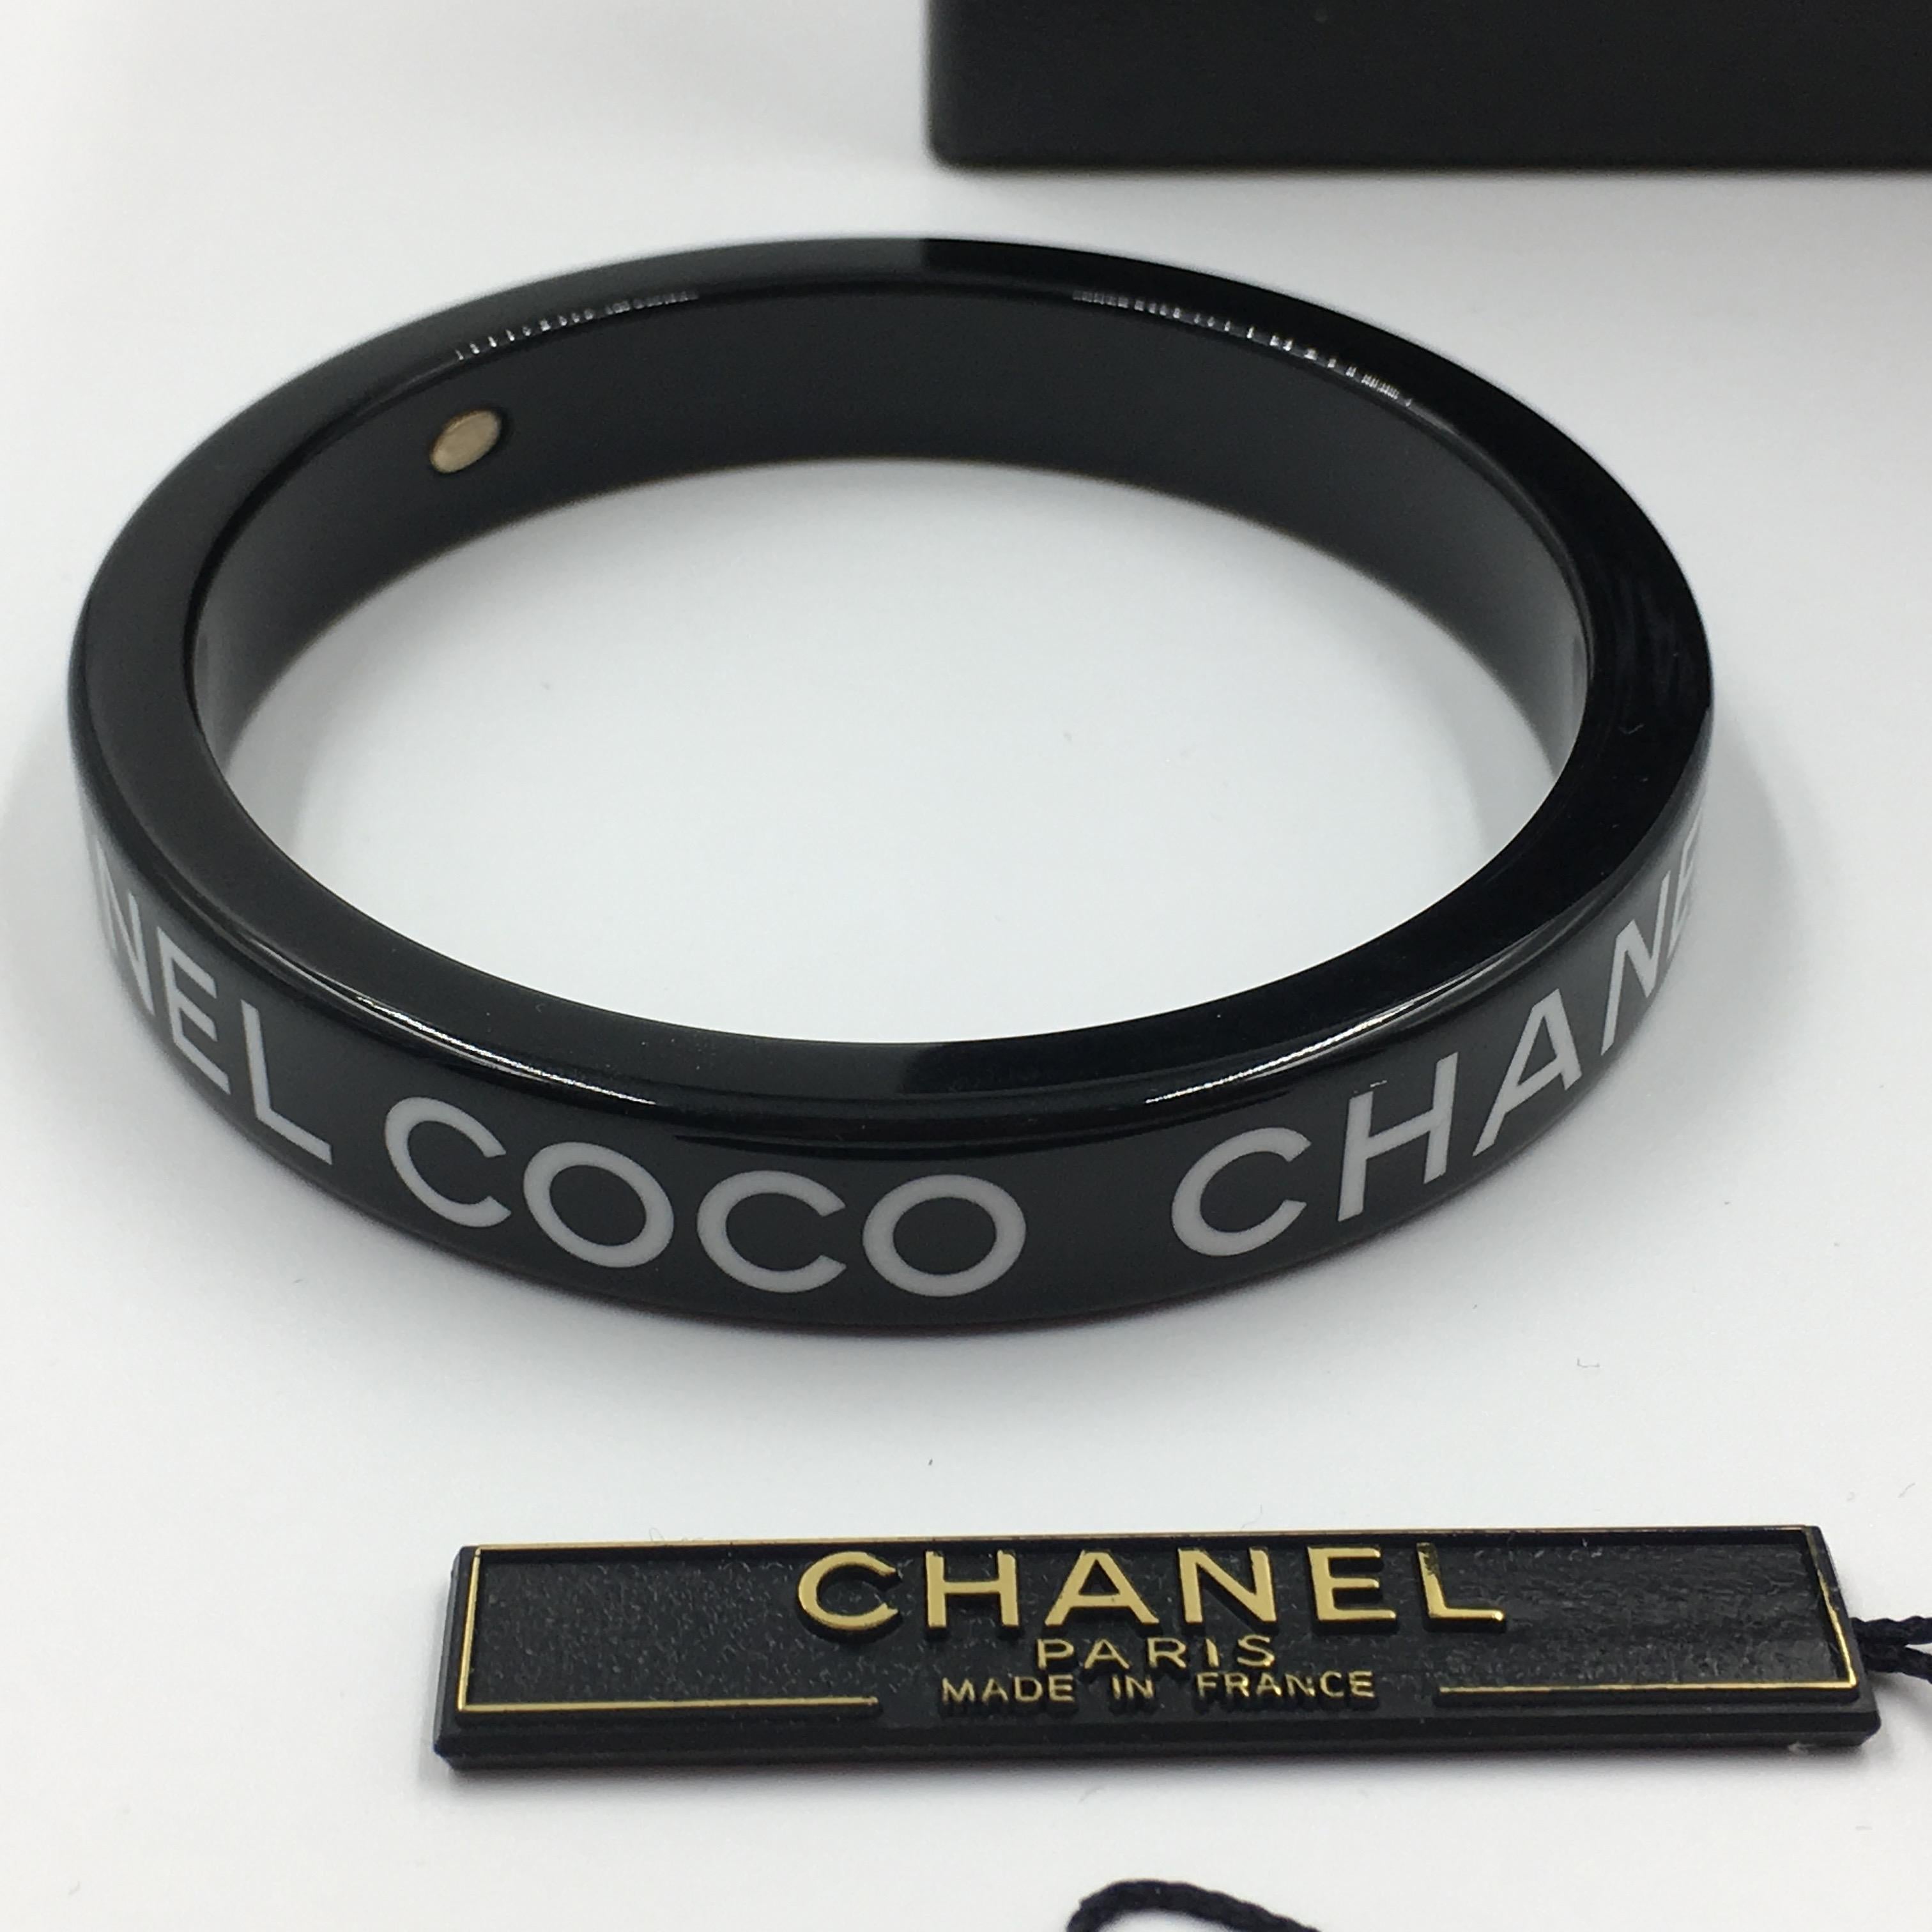 Chanel Black Logo Bangle - Continual name printed along entire bangle- Coco Chanel Coco Chanel Coco Chanel. Stamped Chanel inside. Made in France.
In very good vintage condition. 

Measurements are as follows:

Outer width- 3